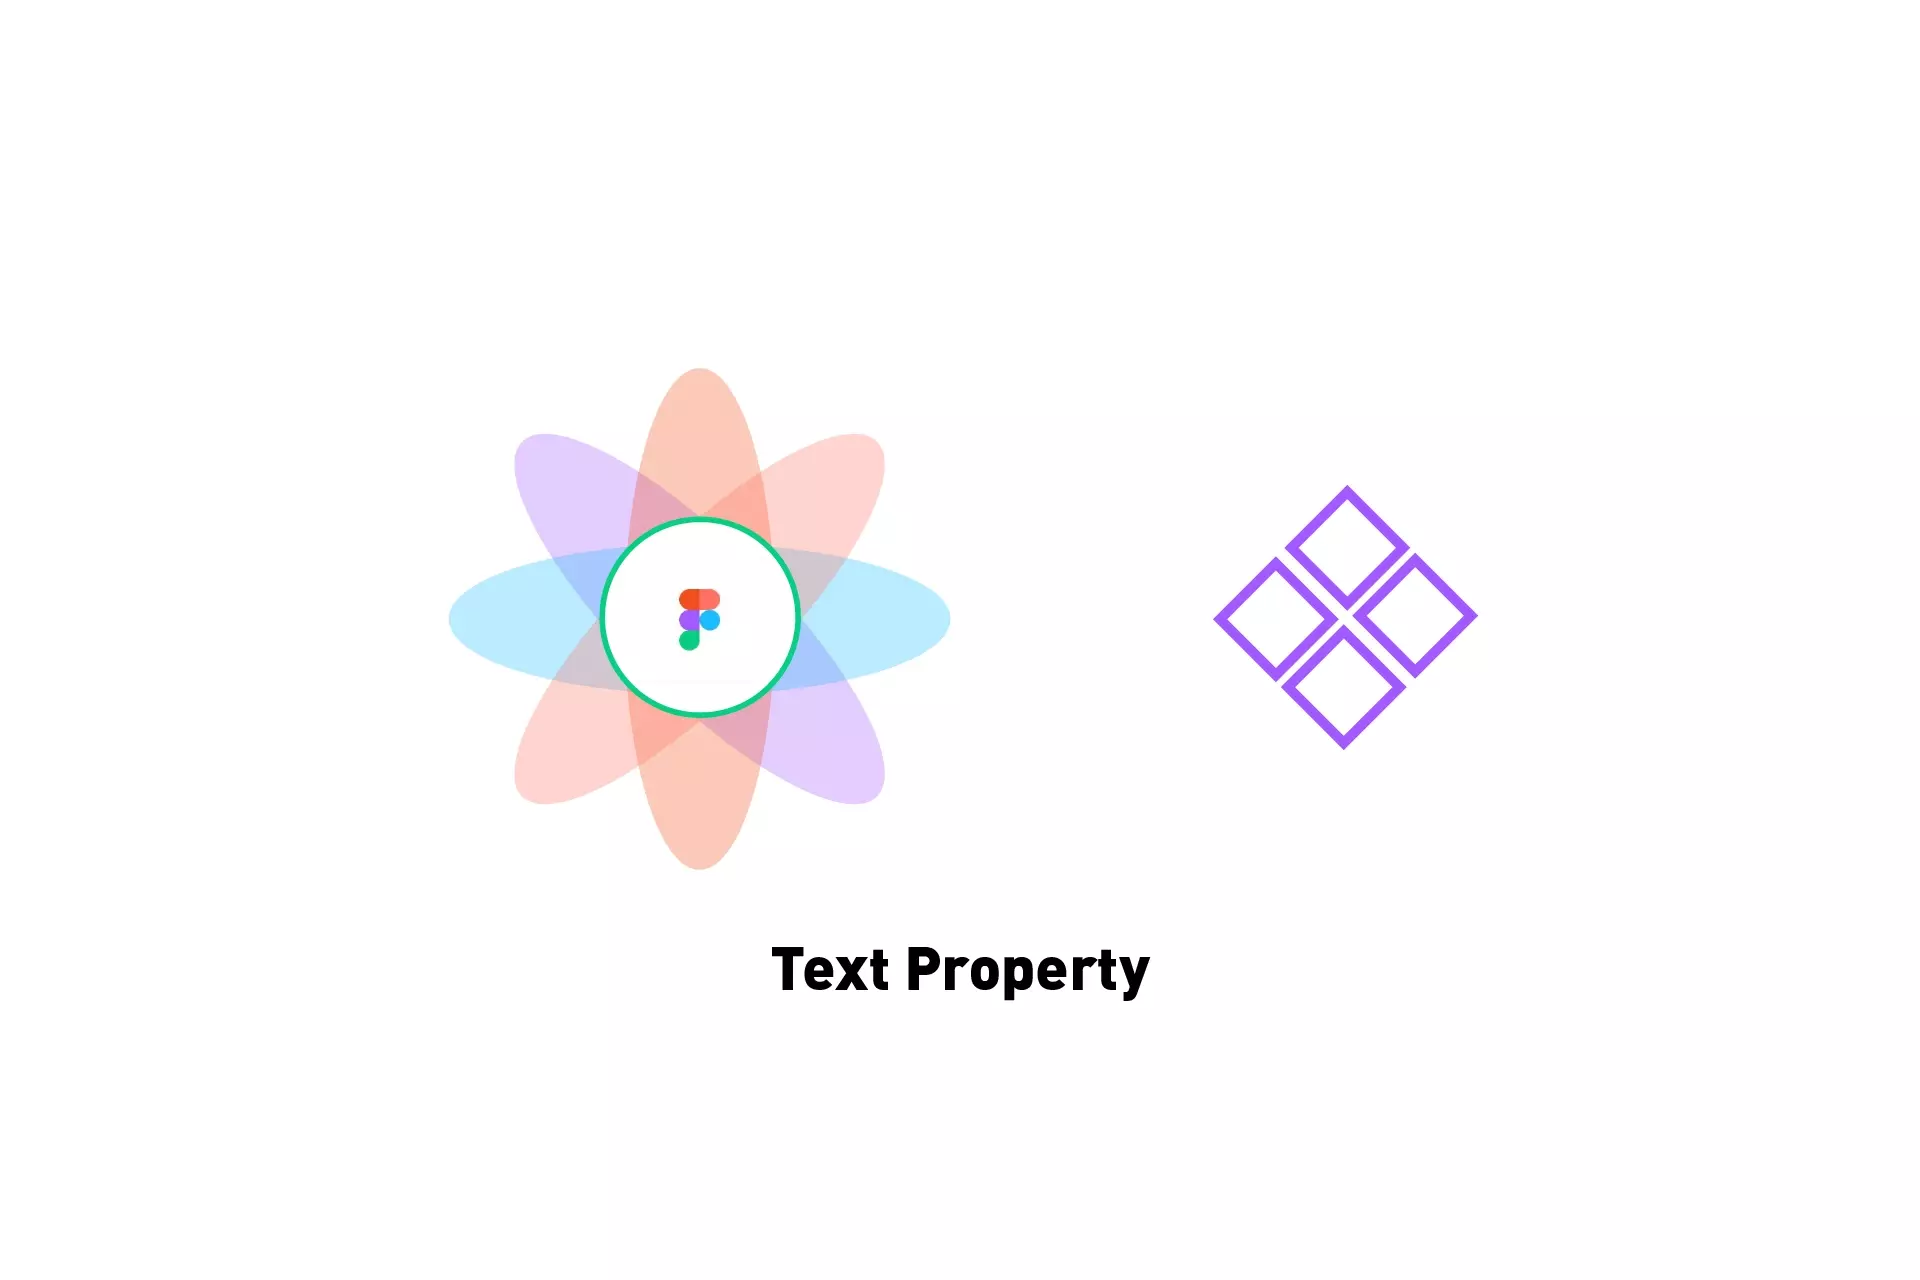 A flower that represents Figma next to an icon that represents Figma Components. Beneath it sits the text "Text Property".